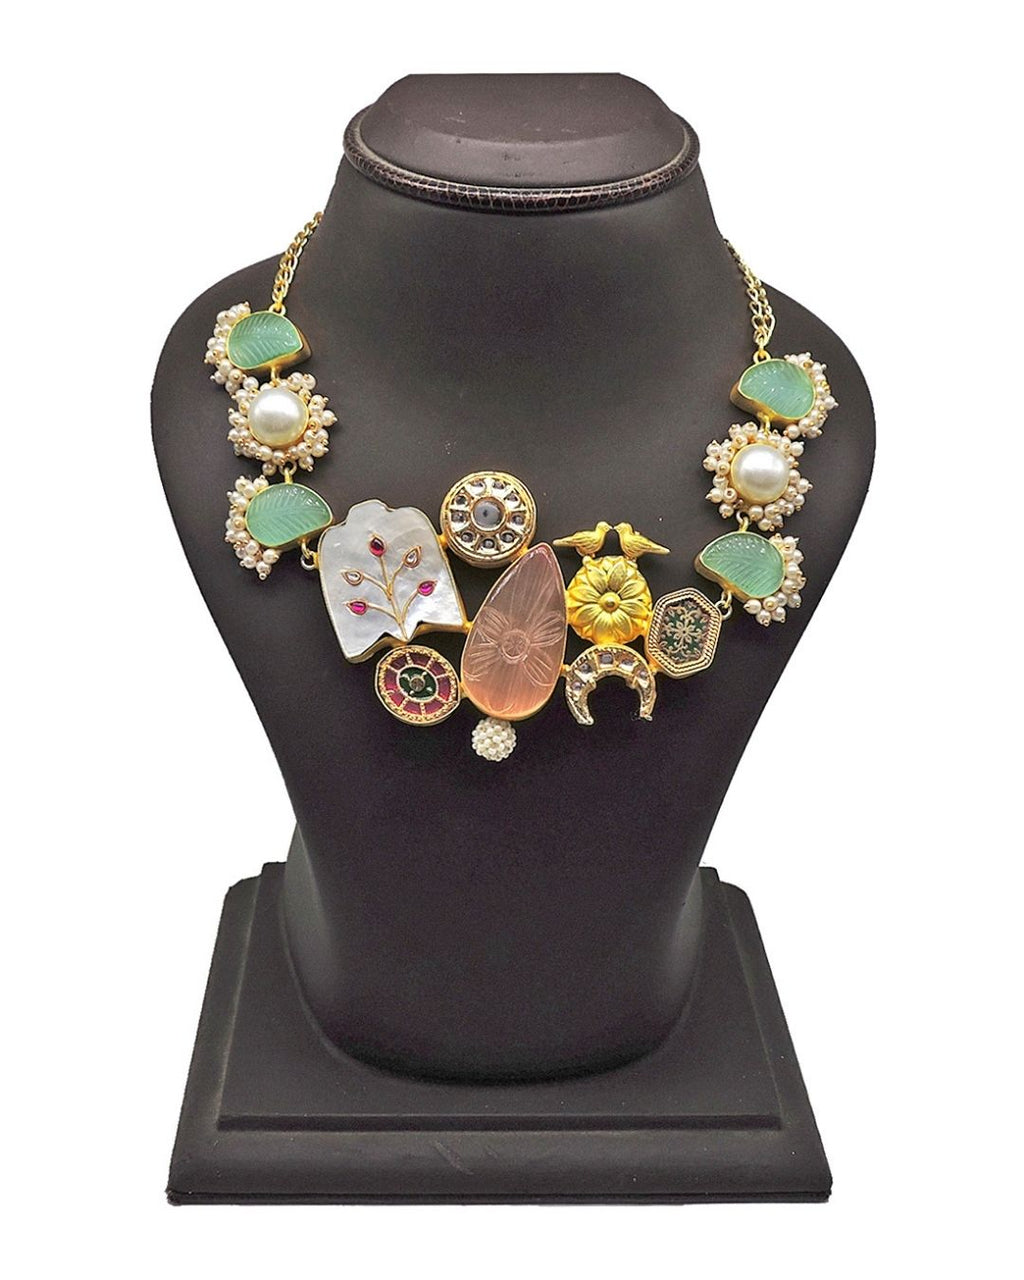 Dayana Necklace - Necklaces - Handcrafted Jewellery - Made in India - Dubai Jewellery, Fashion & Lifestyle - Dori